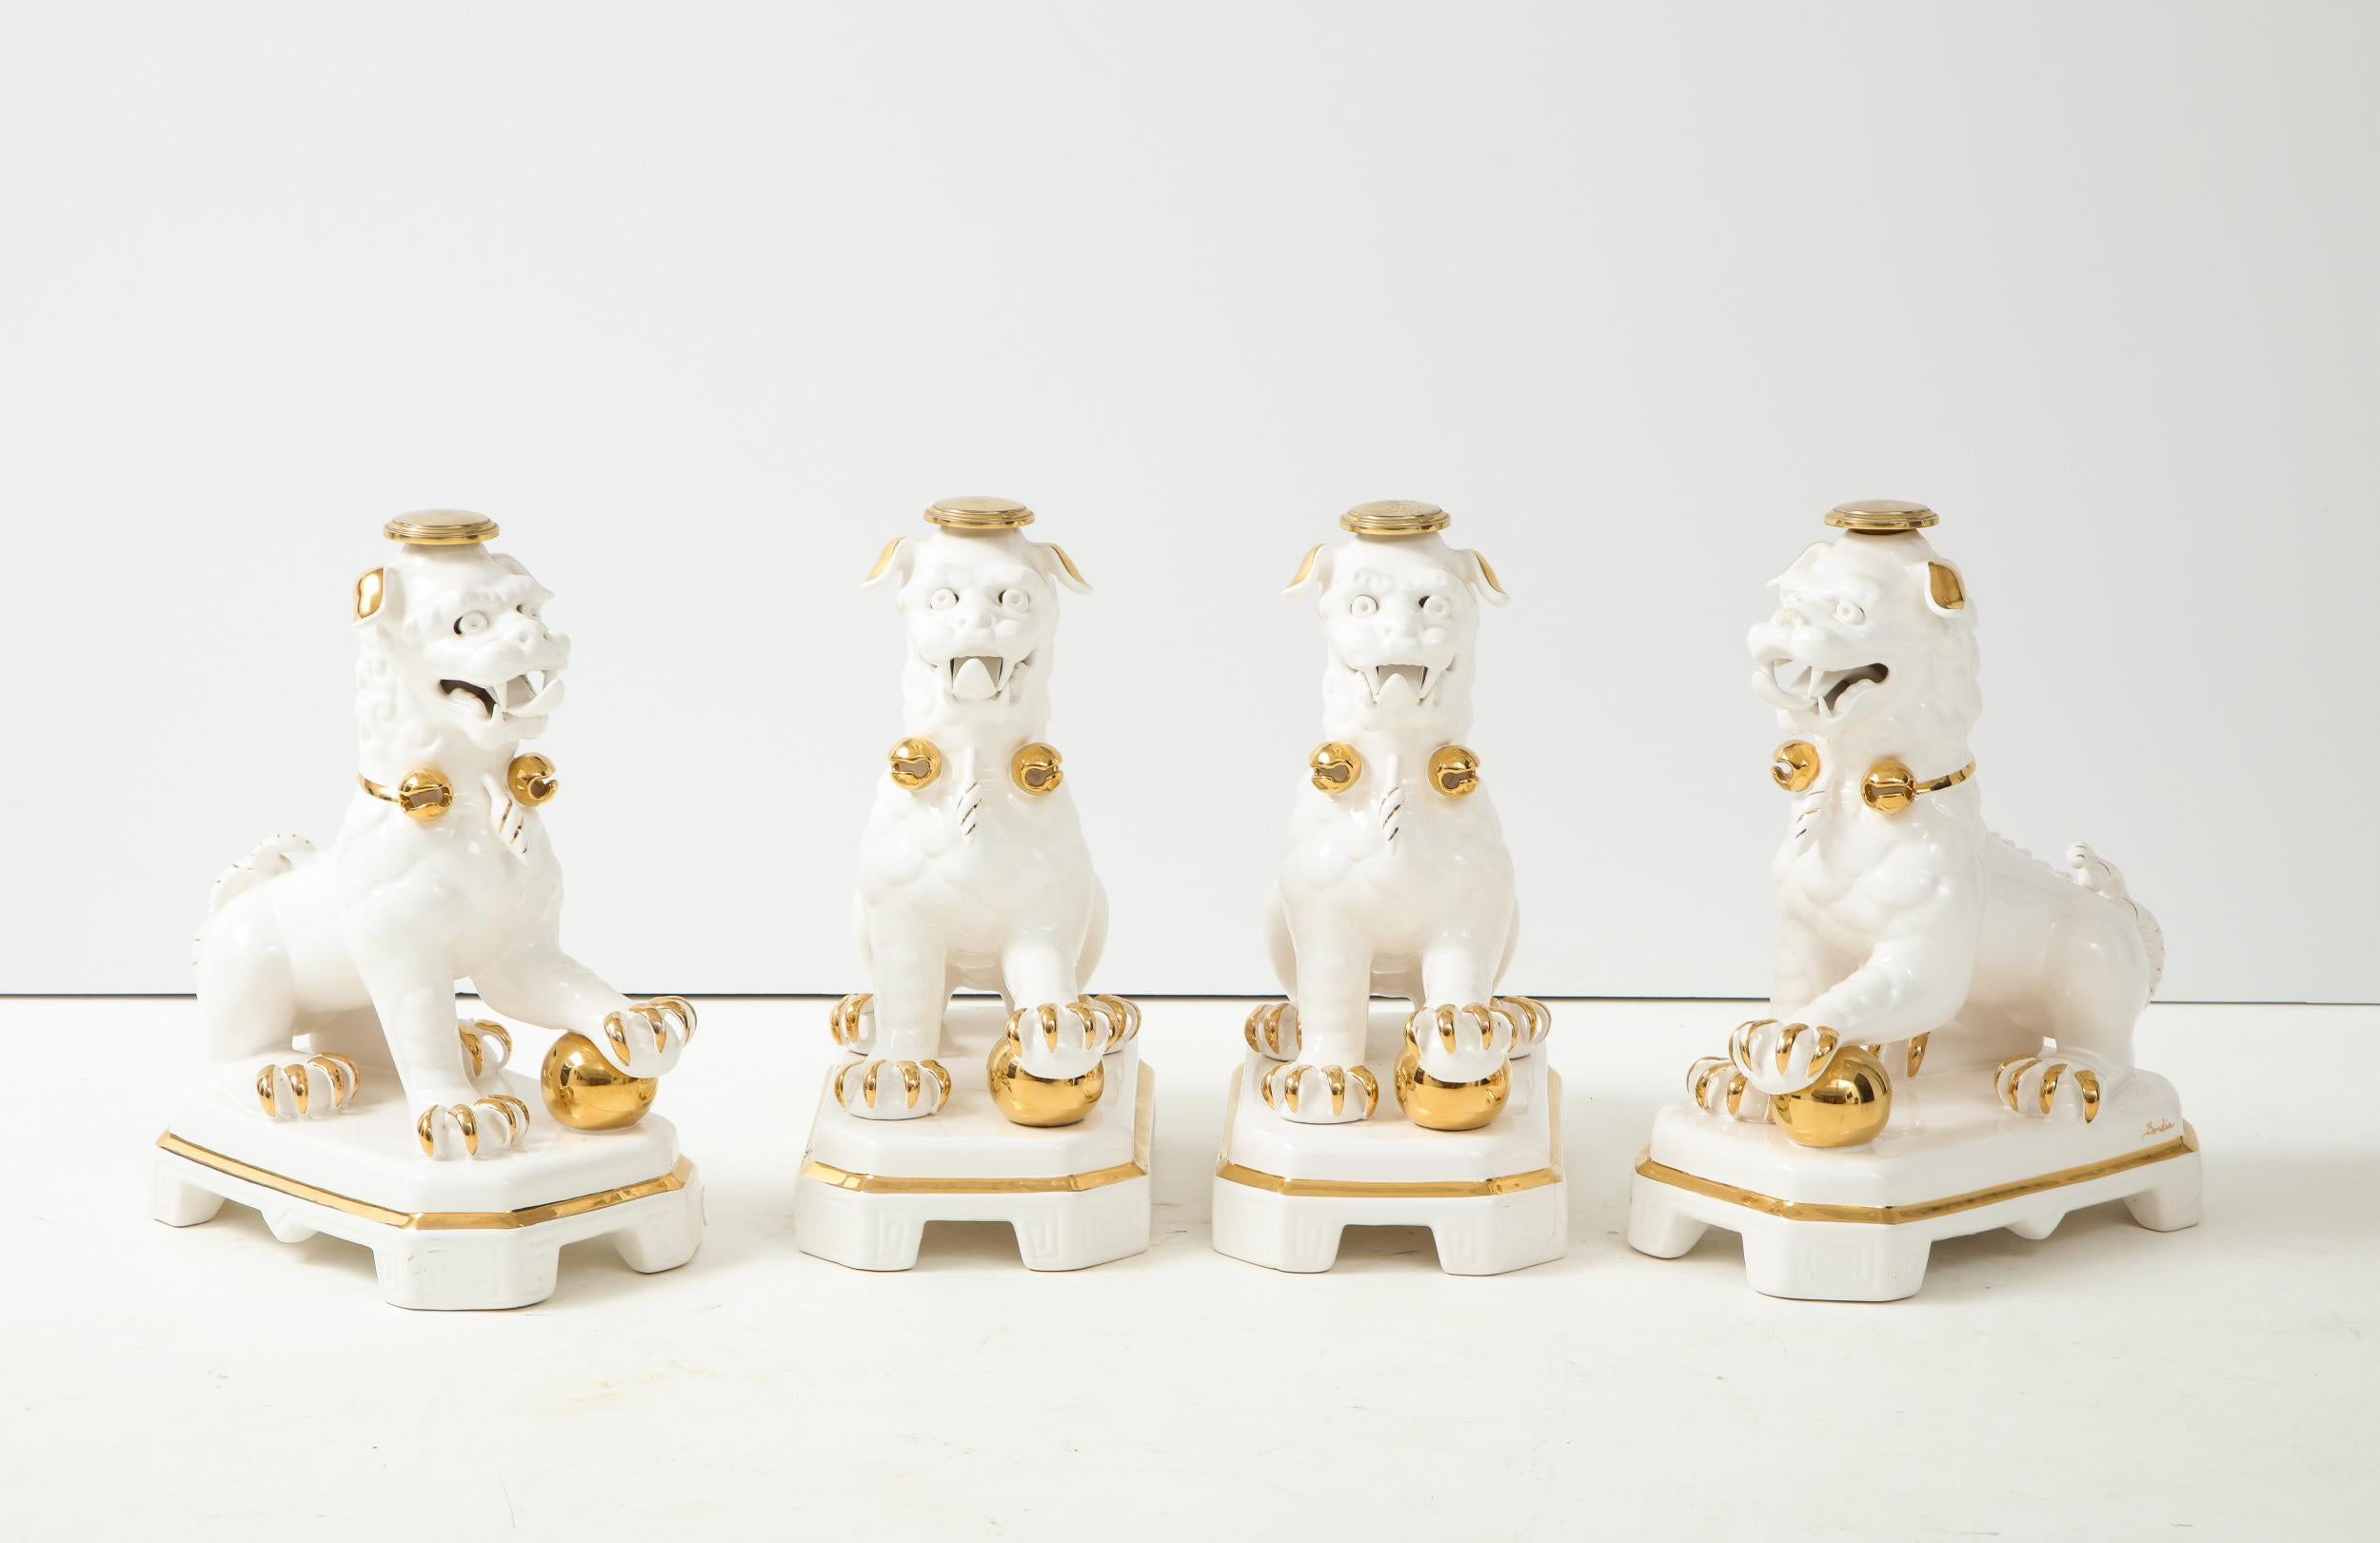 A set of four white and gold ceramic Foo Dog table bases. Made in Spain by Bondia in the Hollywood Regency style. Ornate ceramic sculptures with detailed faces, mouths, bodies, and paws. All four Foo Dogs are male with a front paw on a ball. Each of